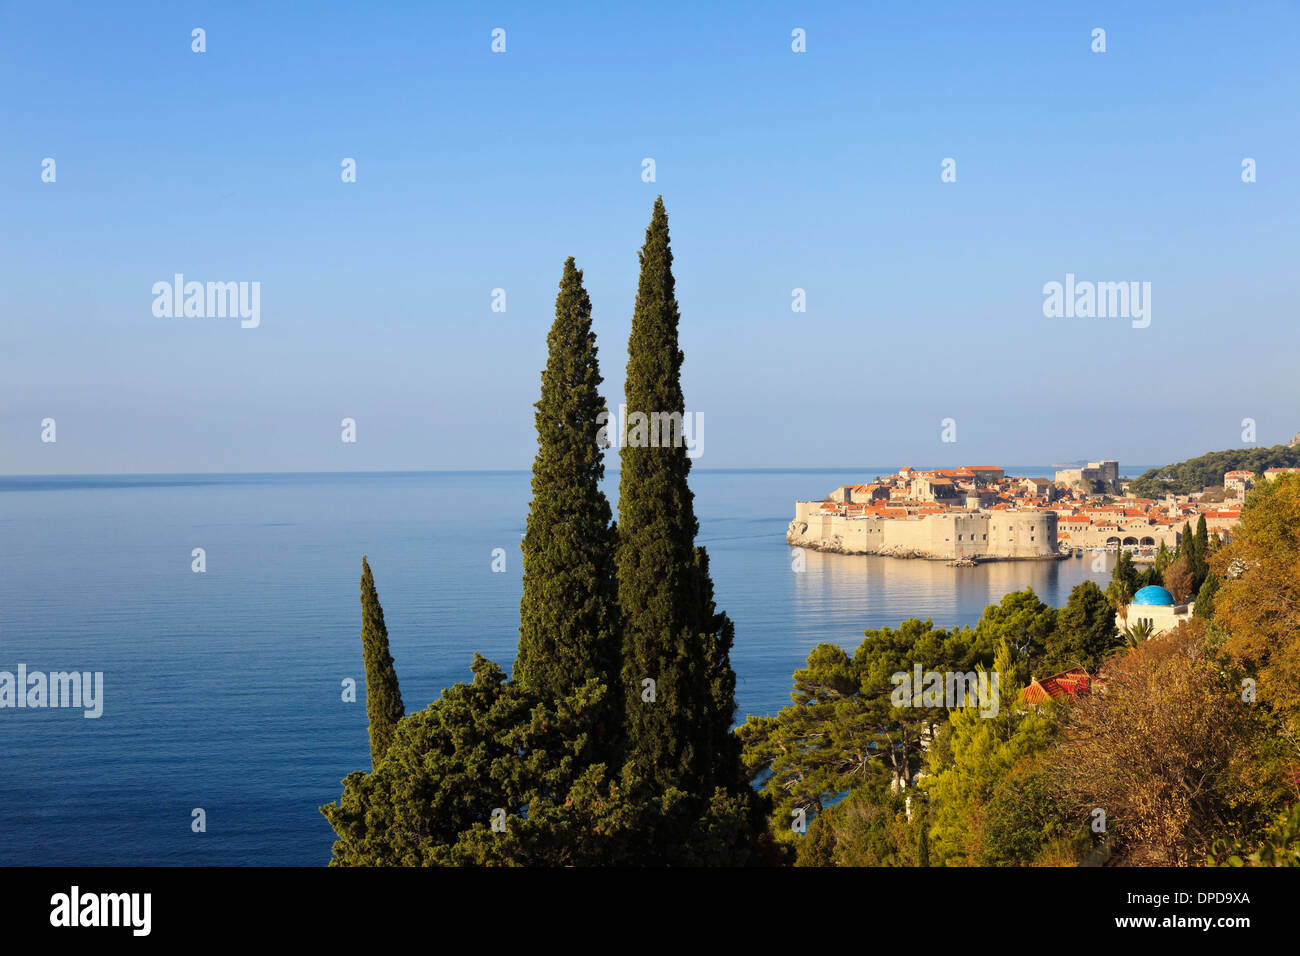 Croatia, Dubrovnik, View of old town Stock Photo